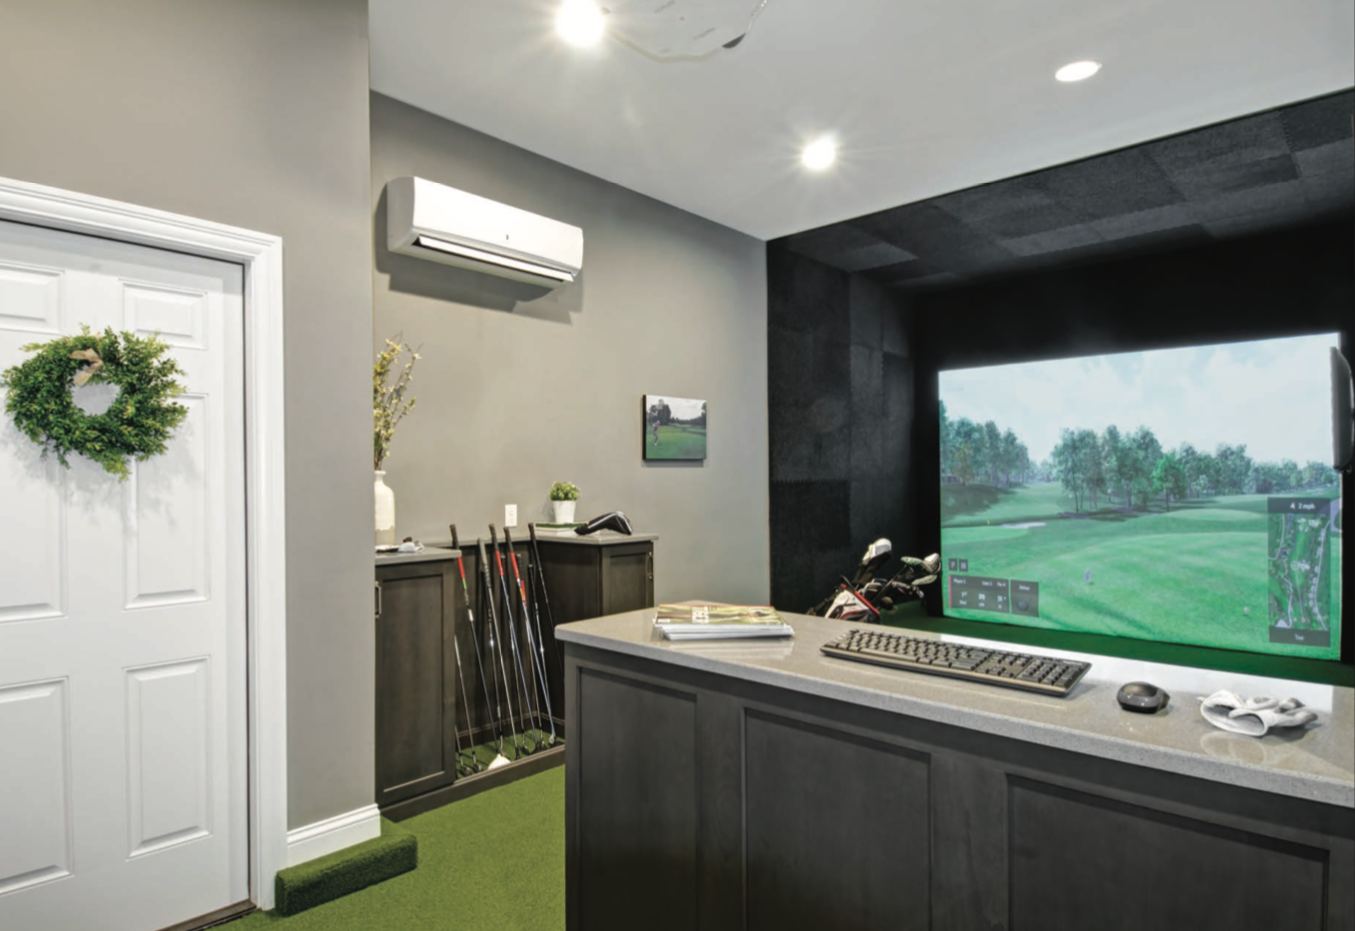 How We Turned a 3 Car Garage Into a Home Golf Simulator Room | Garage  Remodeling in Columbus, Ohio - Dave Fox